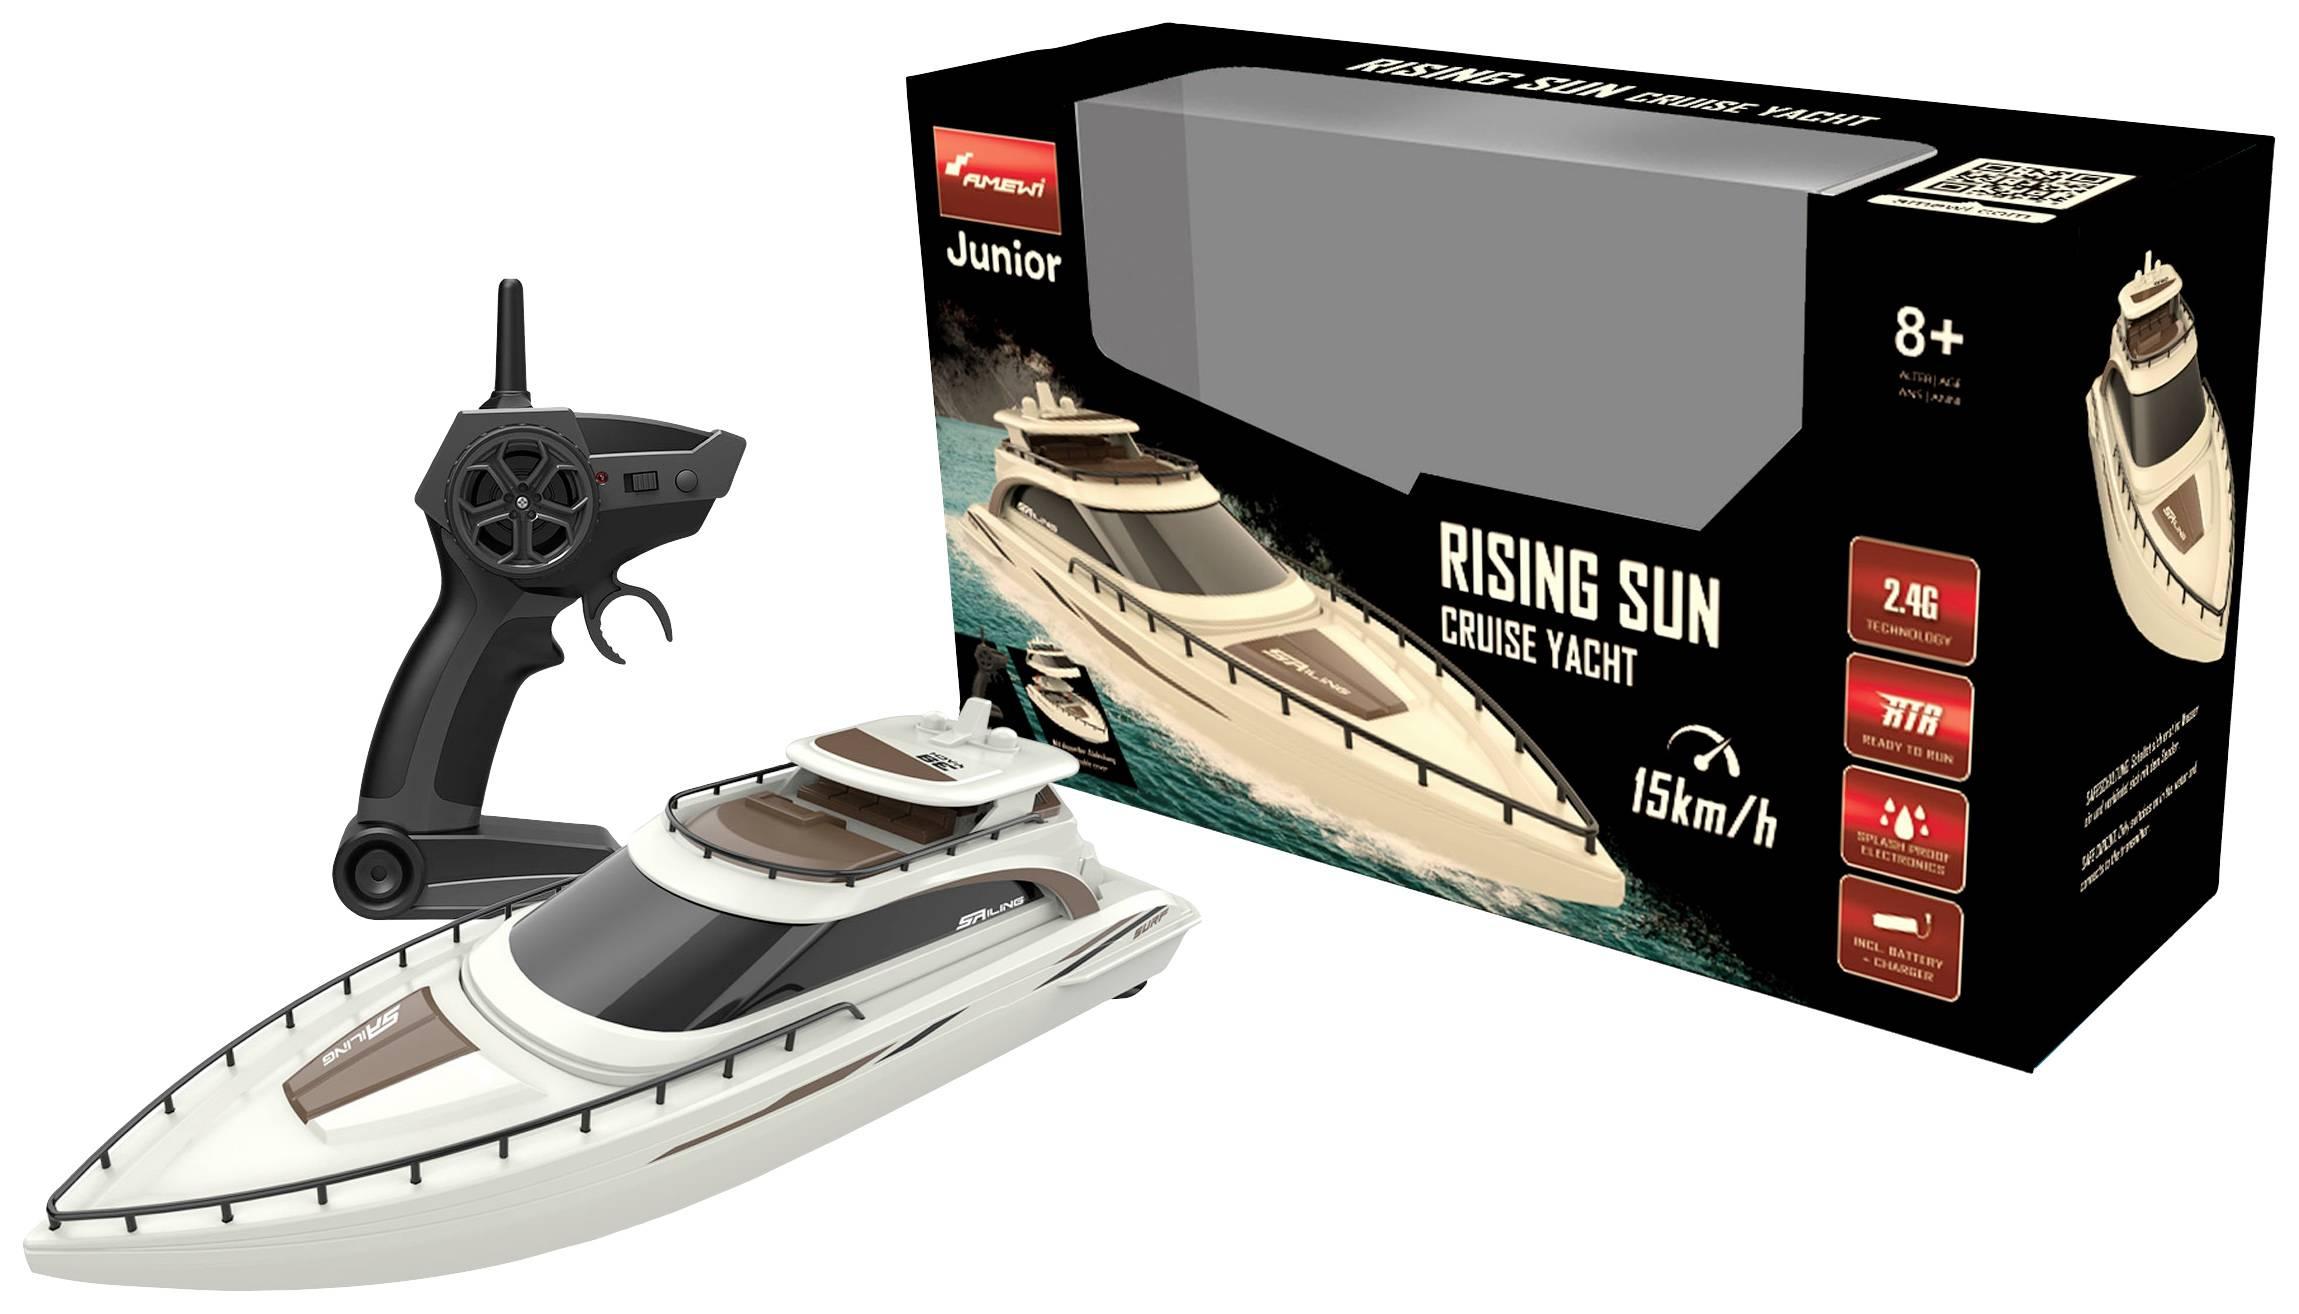 Amewi Rc Boat: Maximizing the lifespan of your Amewi RC Boat through proper care and maintenance.